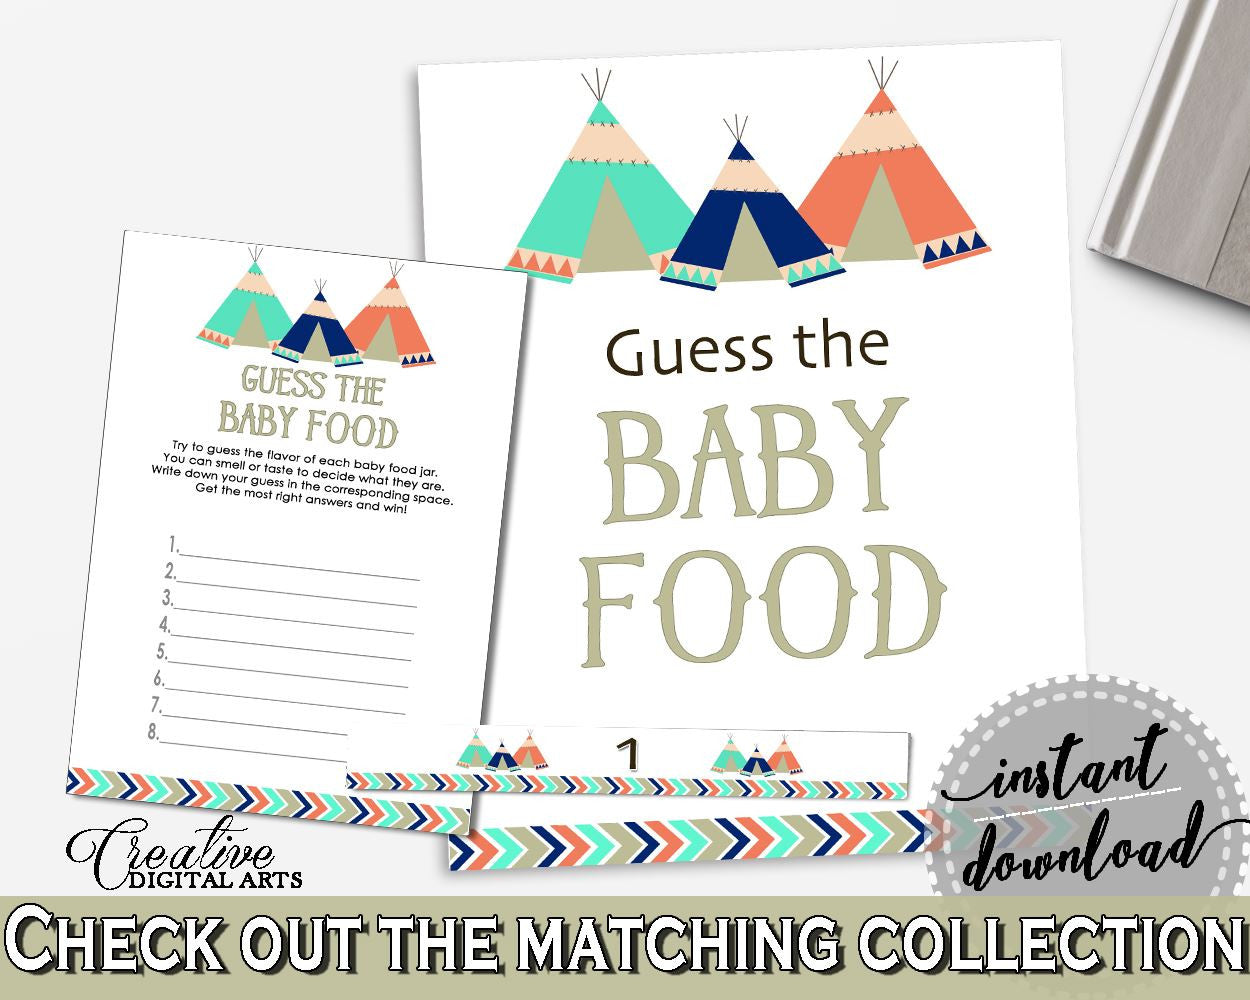 Baby Food Guessing Baby Shower Baby Food Guessing Tribal Teepee Baby Shower Baby Food Guessing Baby Shower Tribal Teepee Baby Food KS6AW - Digital Product